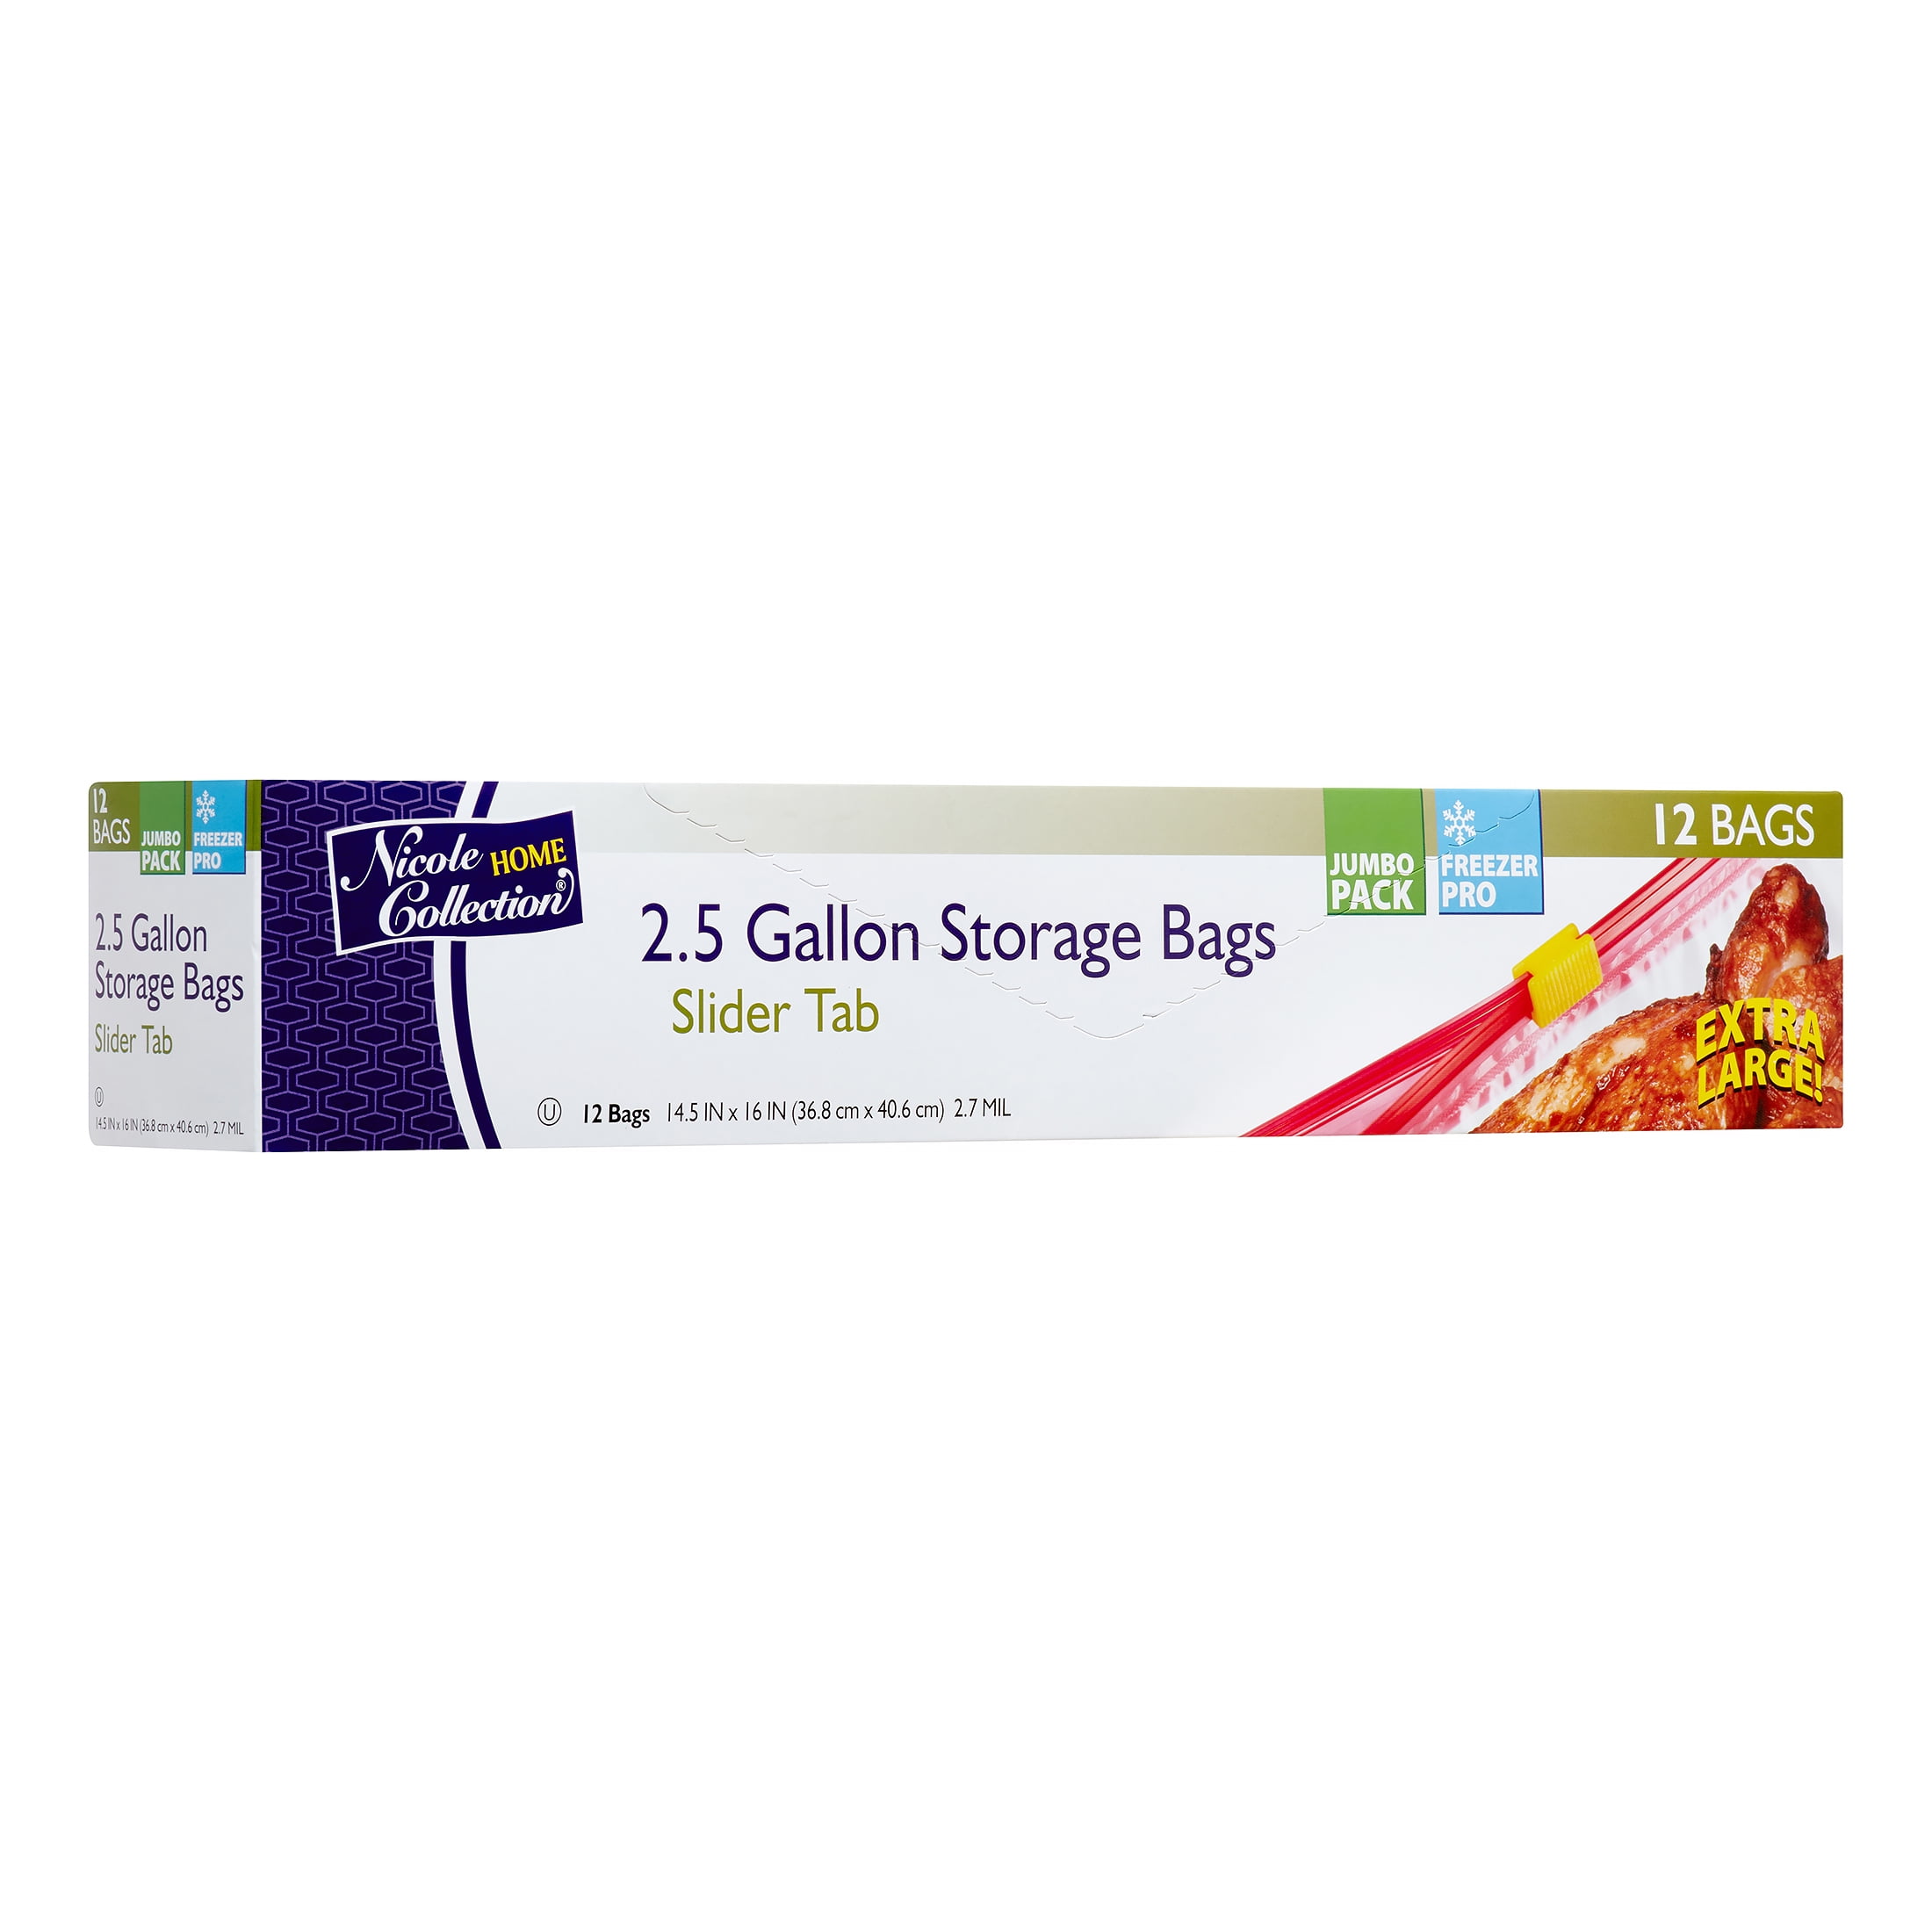 Nicole Home Collection Gallon Size Freezer Storage Bags with Slide